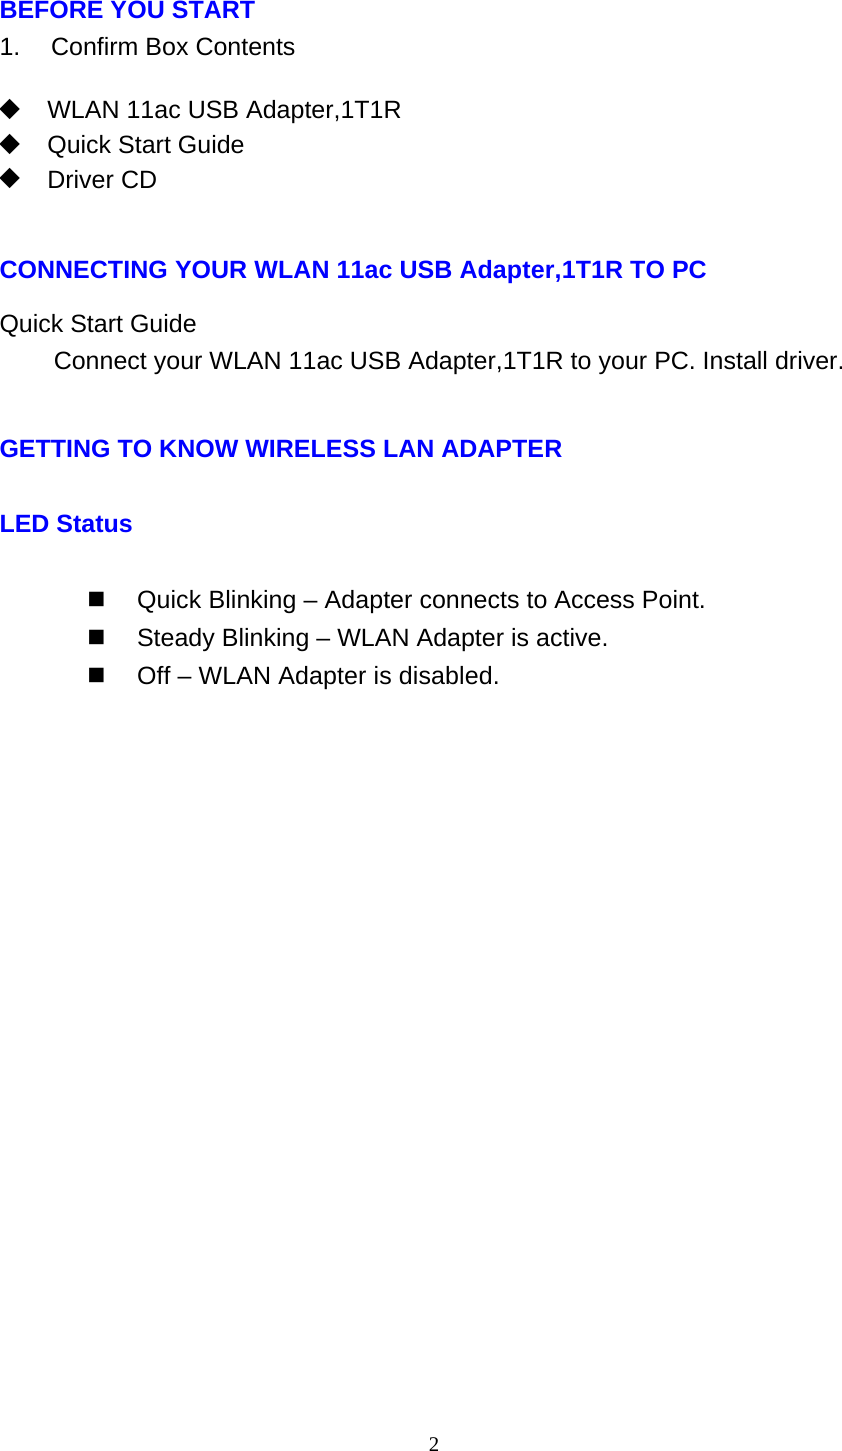 2   BEFORE YOU START 1.    Confirm Box Contents    WLAN 11ac USB Adapter,1T1R   Quick Start Guide  Driver CD    CONNECTING YOUR WLAN 11ac USB Adapter,1T1R TO PC  Quick Start Guide Connect your WLAN 11ac USB Adapter,1T1R to your PC. Install driver.   GETTING TO KNOW WIRELESS LAN ADAPTER LED Status   Quick Blinking – Adapter connects to Access Point.   Steady Blinking – WLAN Adapter is active.   Off – WLAN Adapter is disabled.   